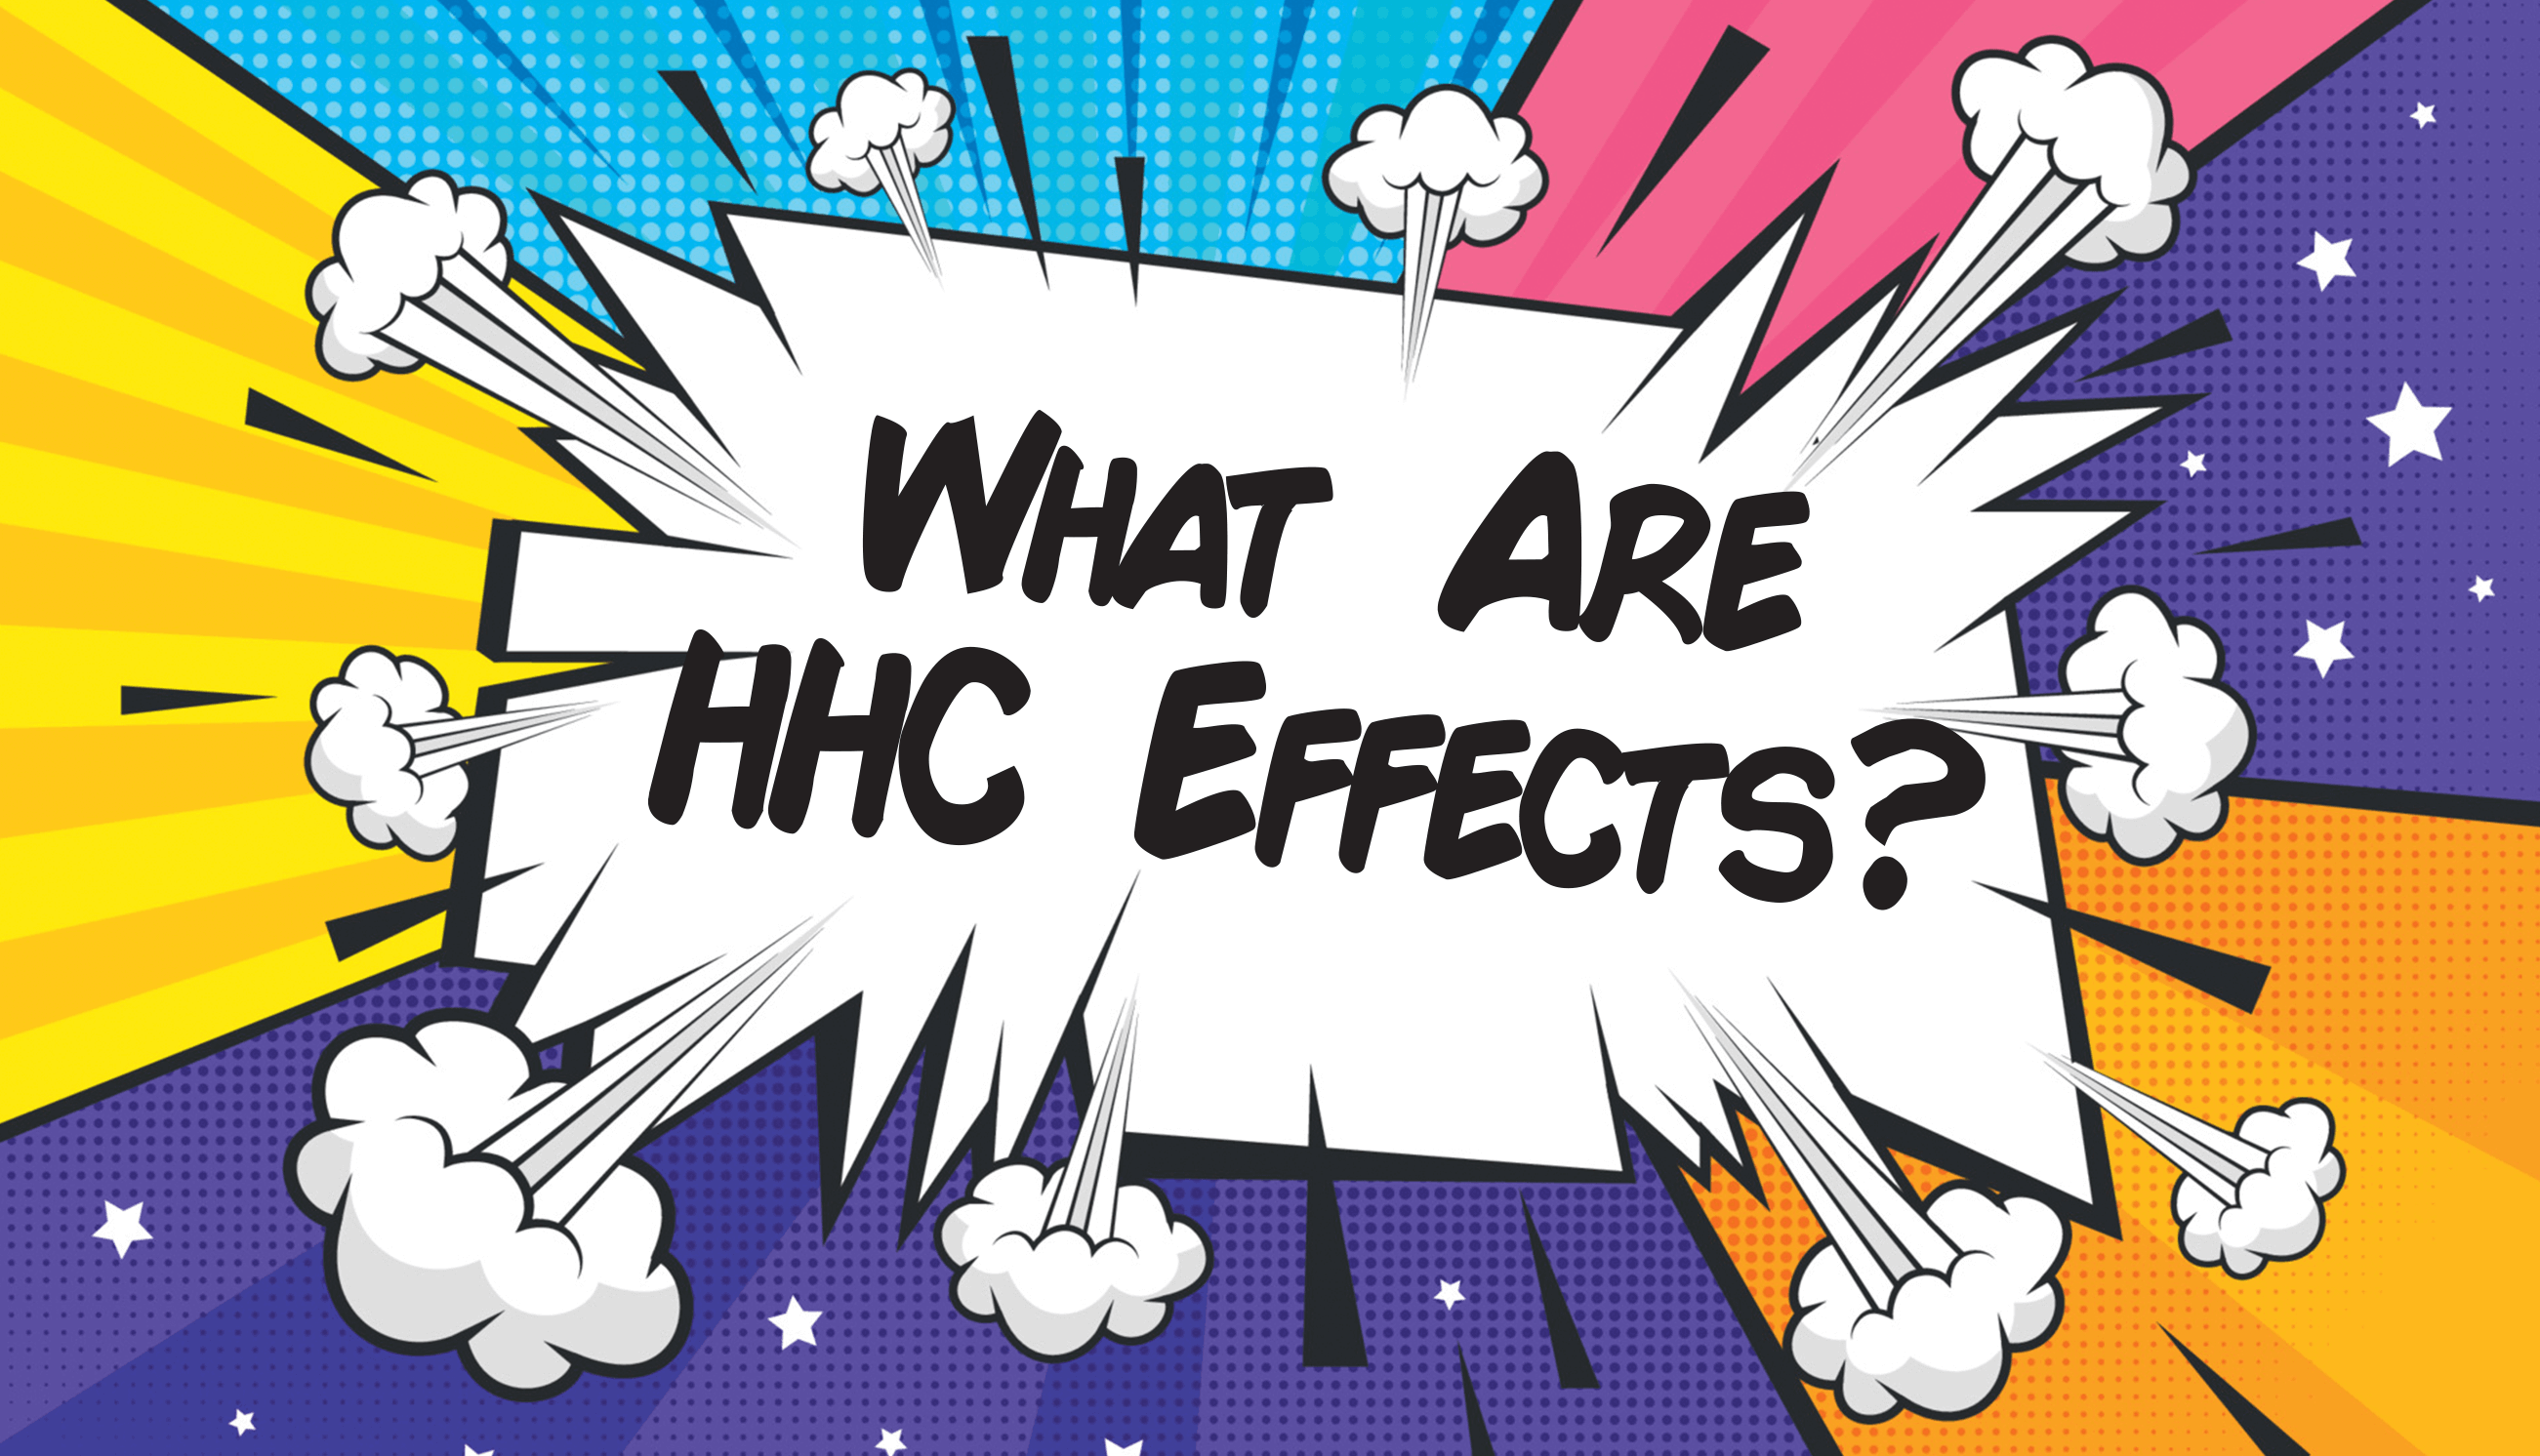 Does HHC Get you High?